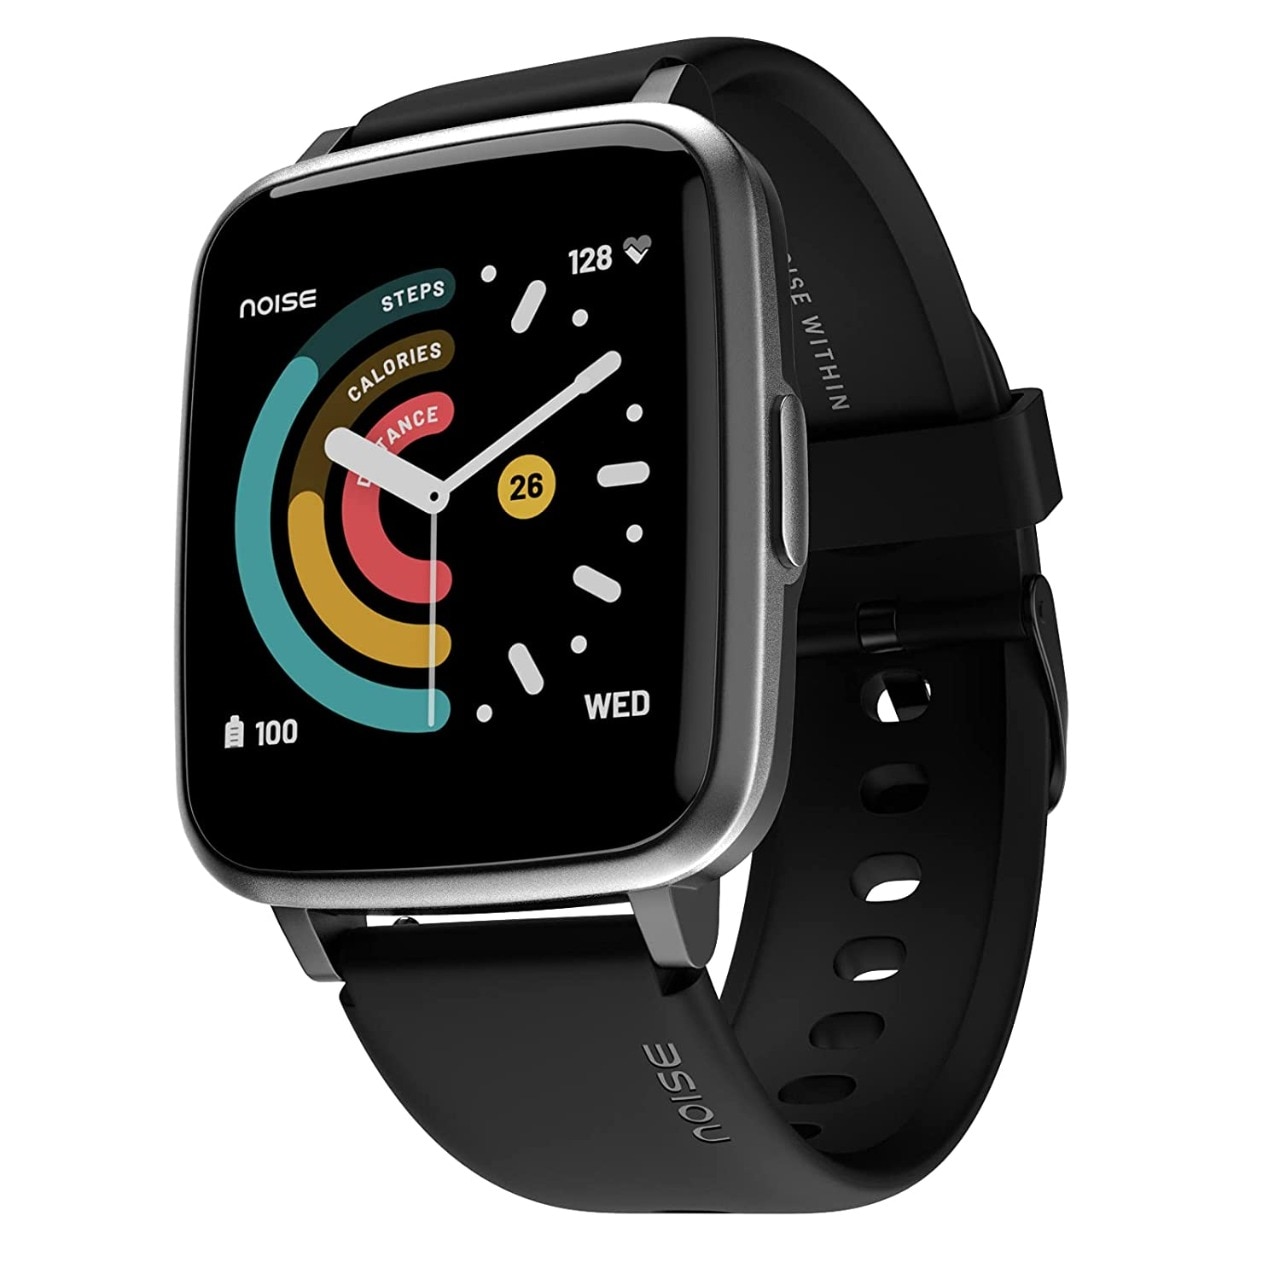 Amazon Festival Sale: Know about the best 5 branded fitness and calling watches, the price in Amazon sale starts from just Rs 1500